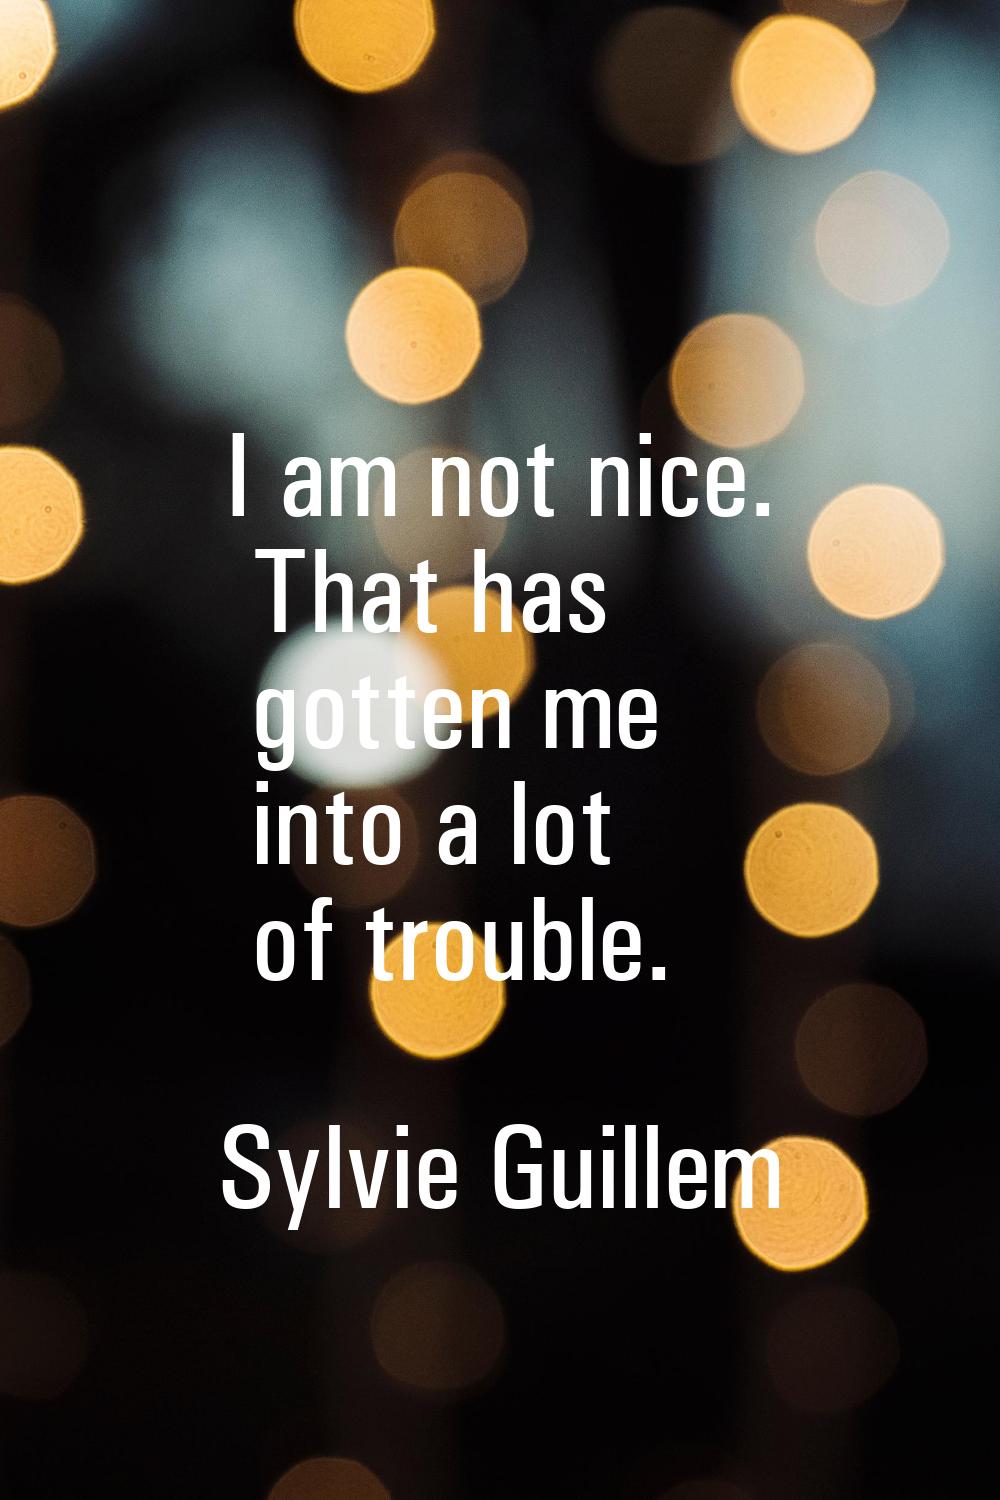 I am not nice. That has gotten me into a lot of trouble.